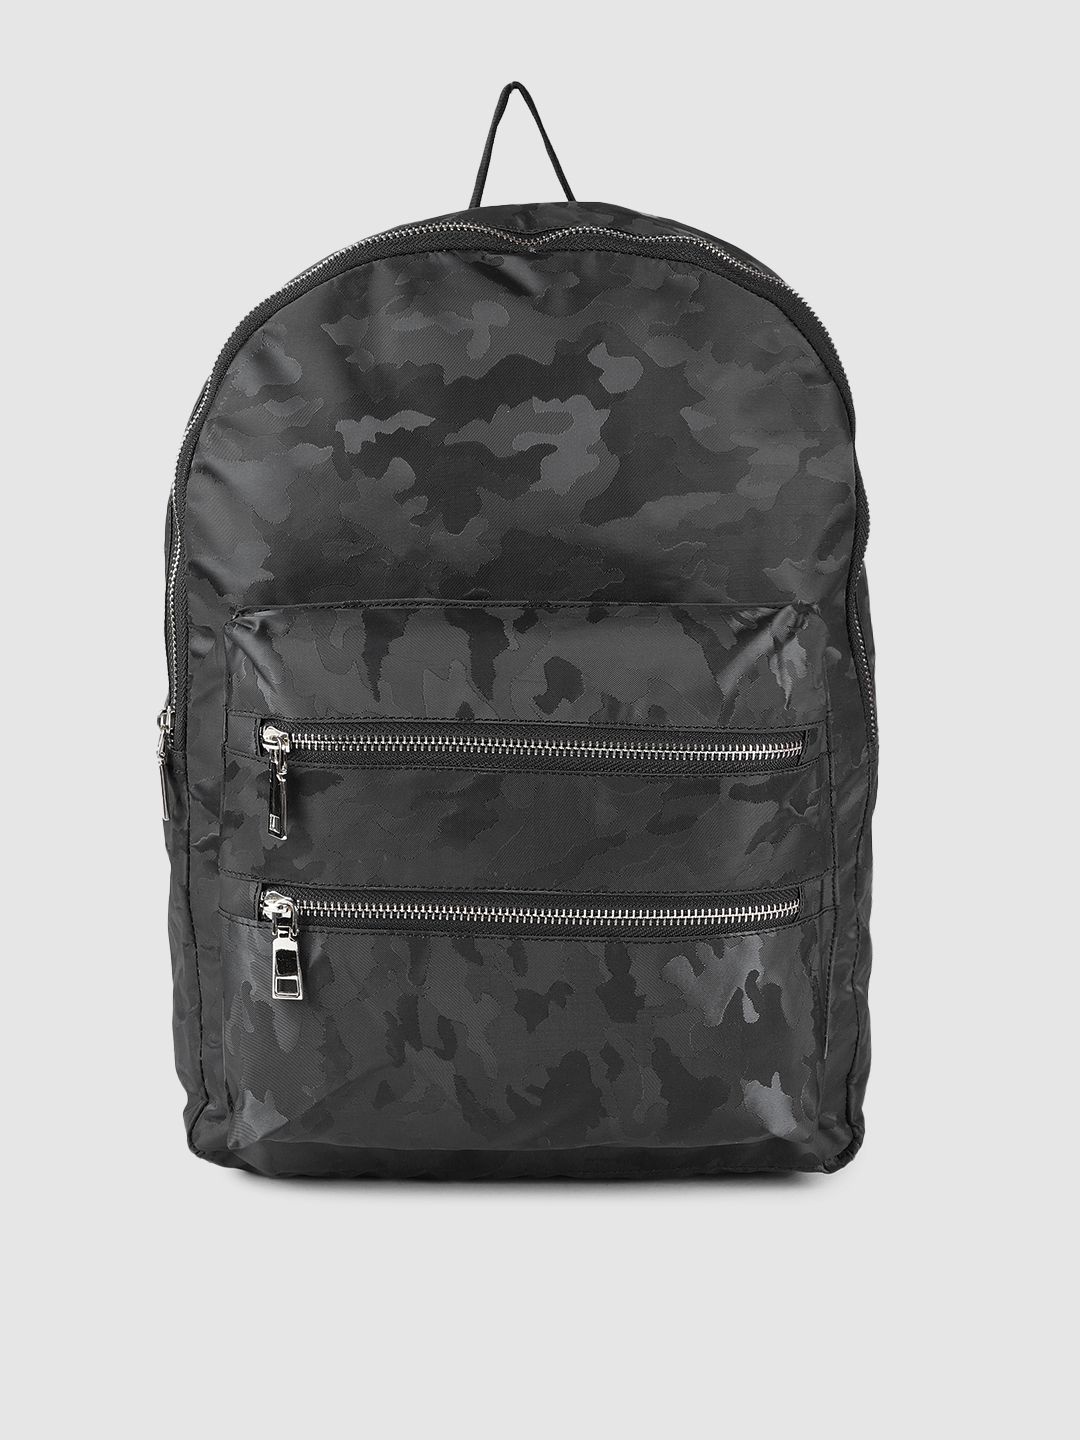 DressBerry Women Black Camouflage Backpack Price in India